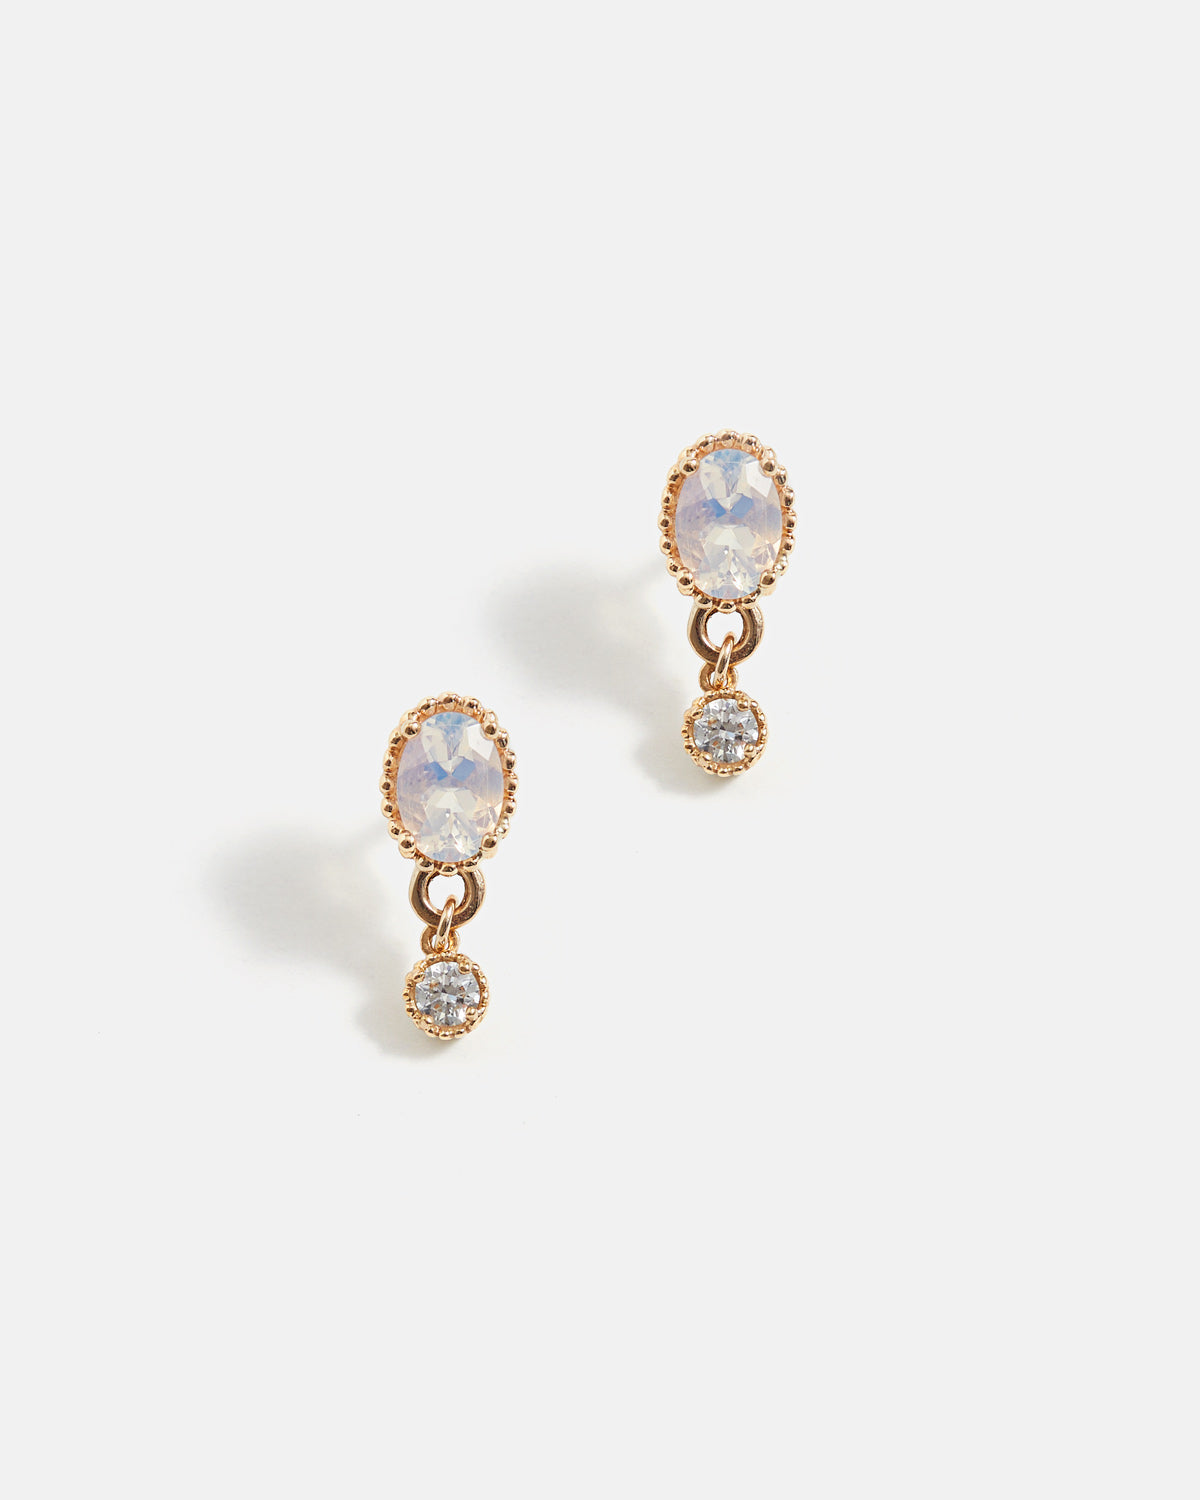 Galatée Earrings in Yellow Gold with White Opals and Lab Grown Diamonds